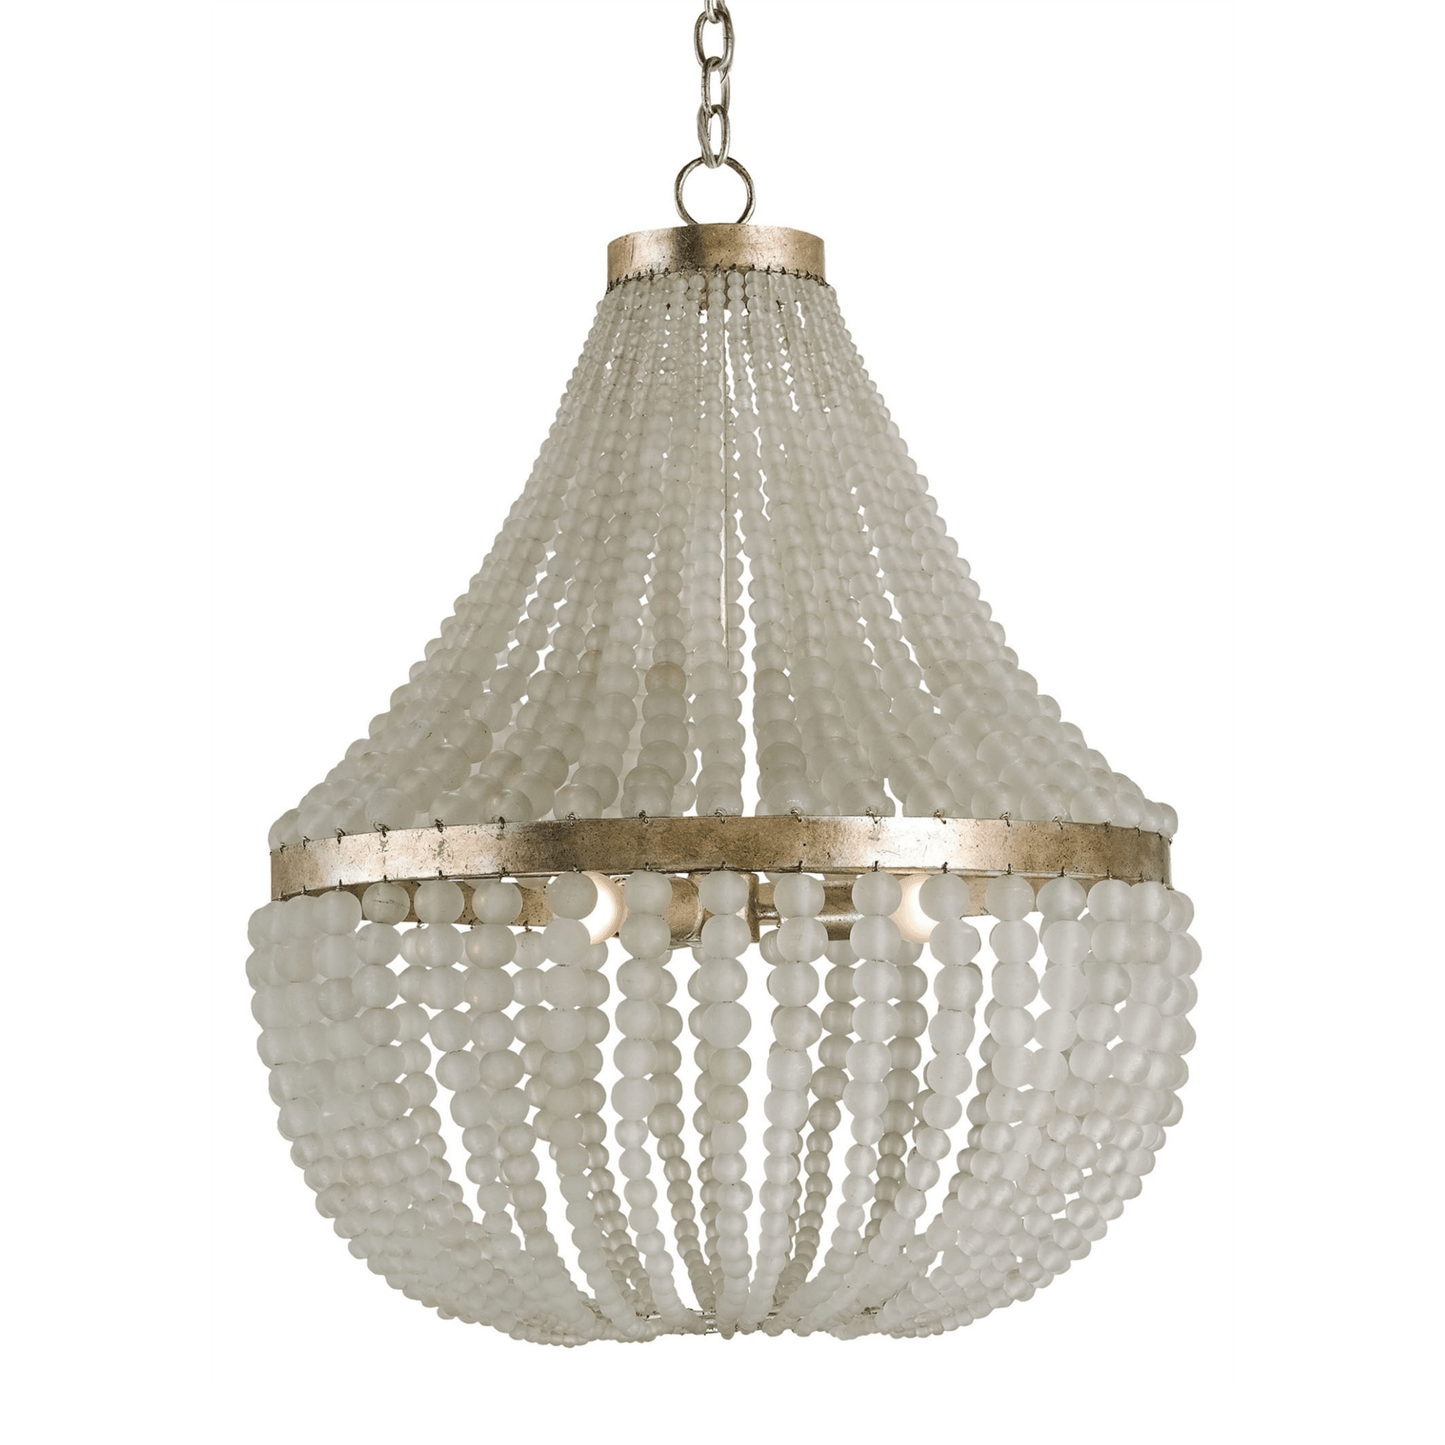 Chanteuse Chandelier 9202 by Currey and Company